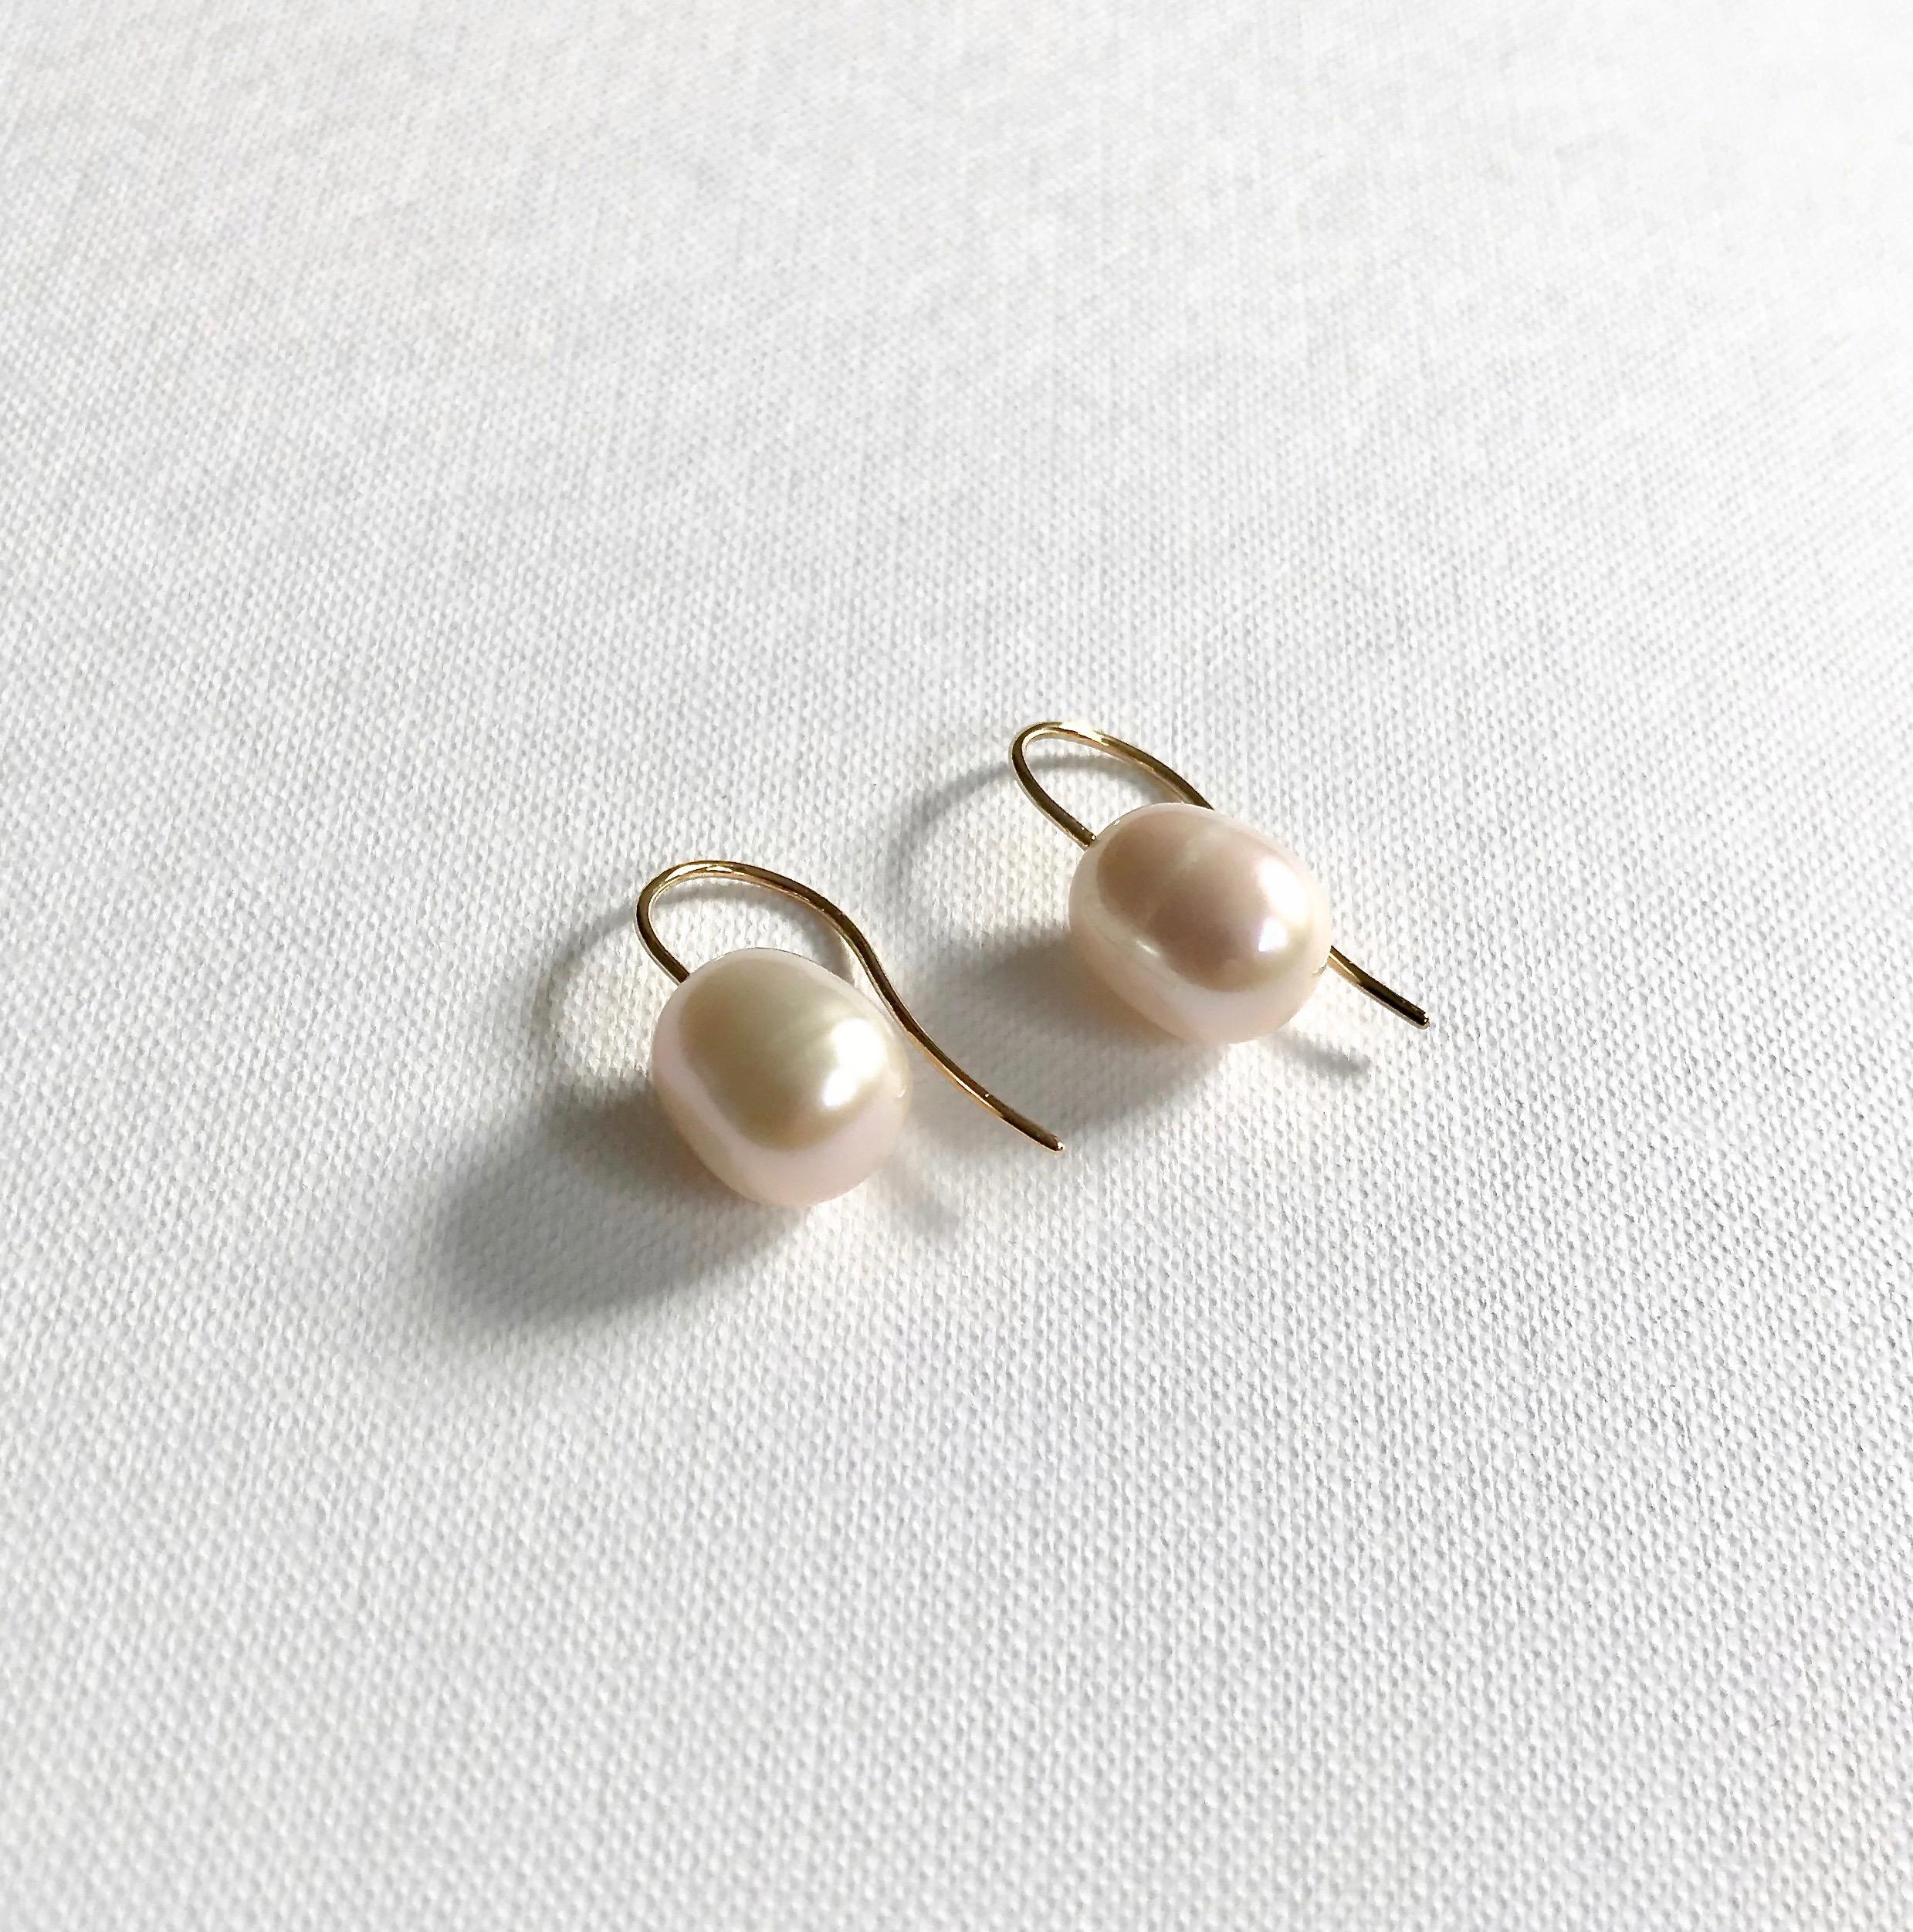 18 Karat solid yellow gold freshwater cultured pearl hook earrings. 
Each pearl is unique due to its nature. They may vary in shapes and colours from pastel shades of pink to creamy white.  We have tried our best to match each pair as close as